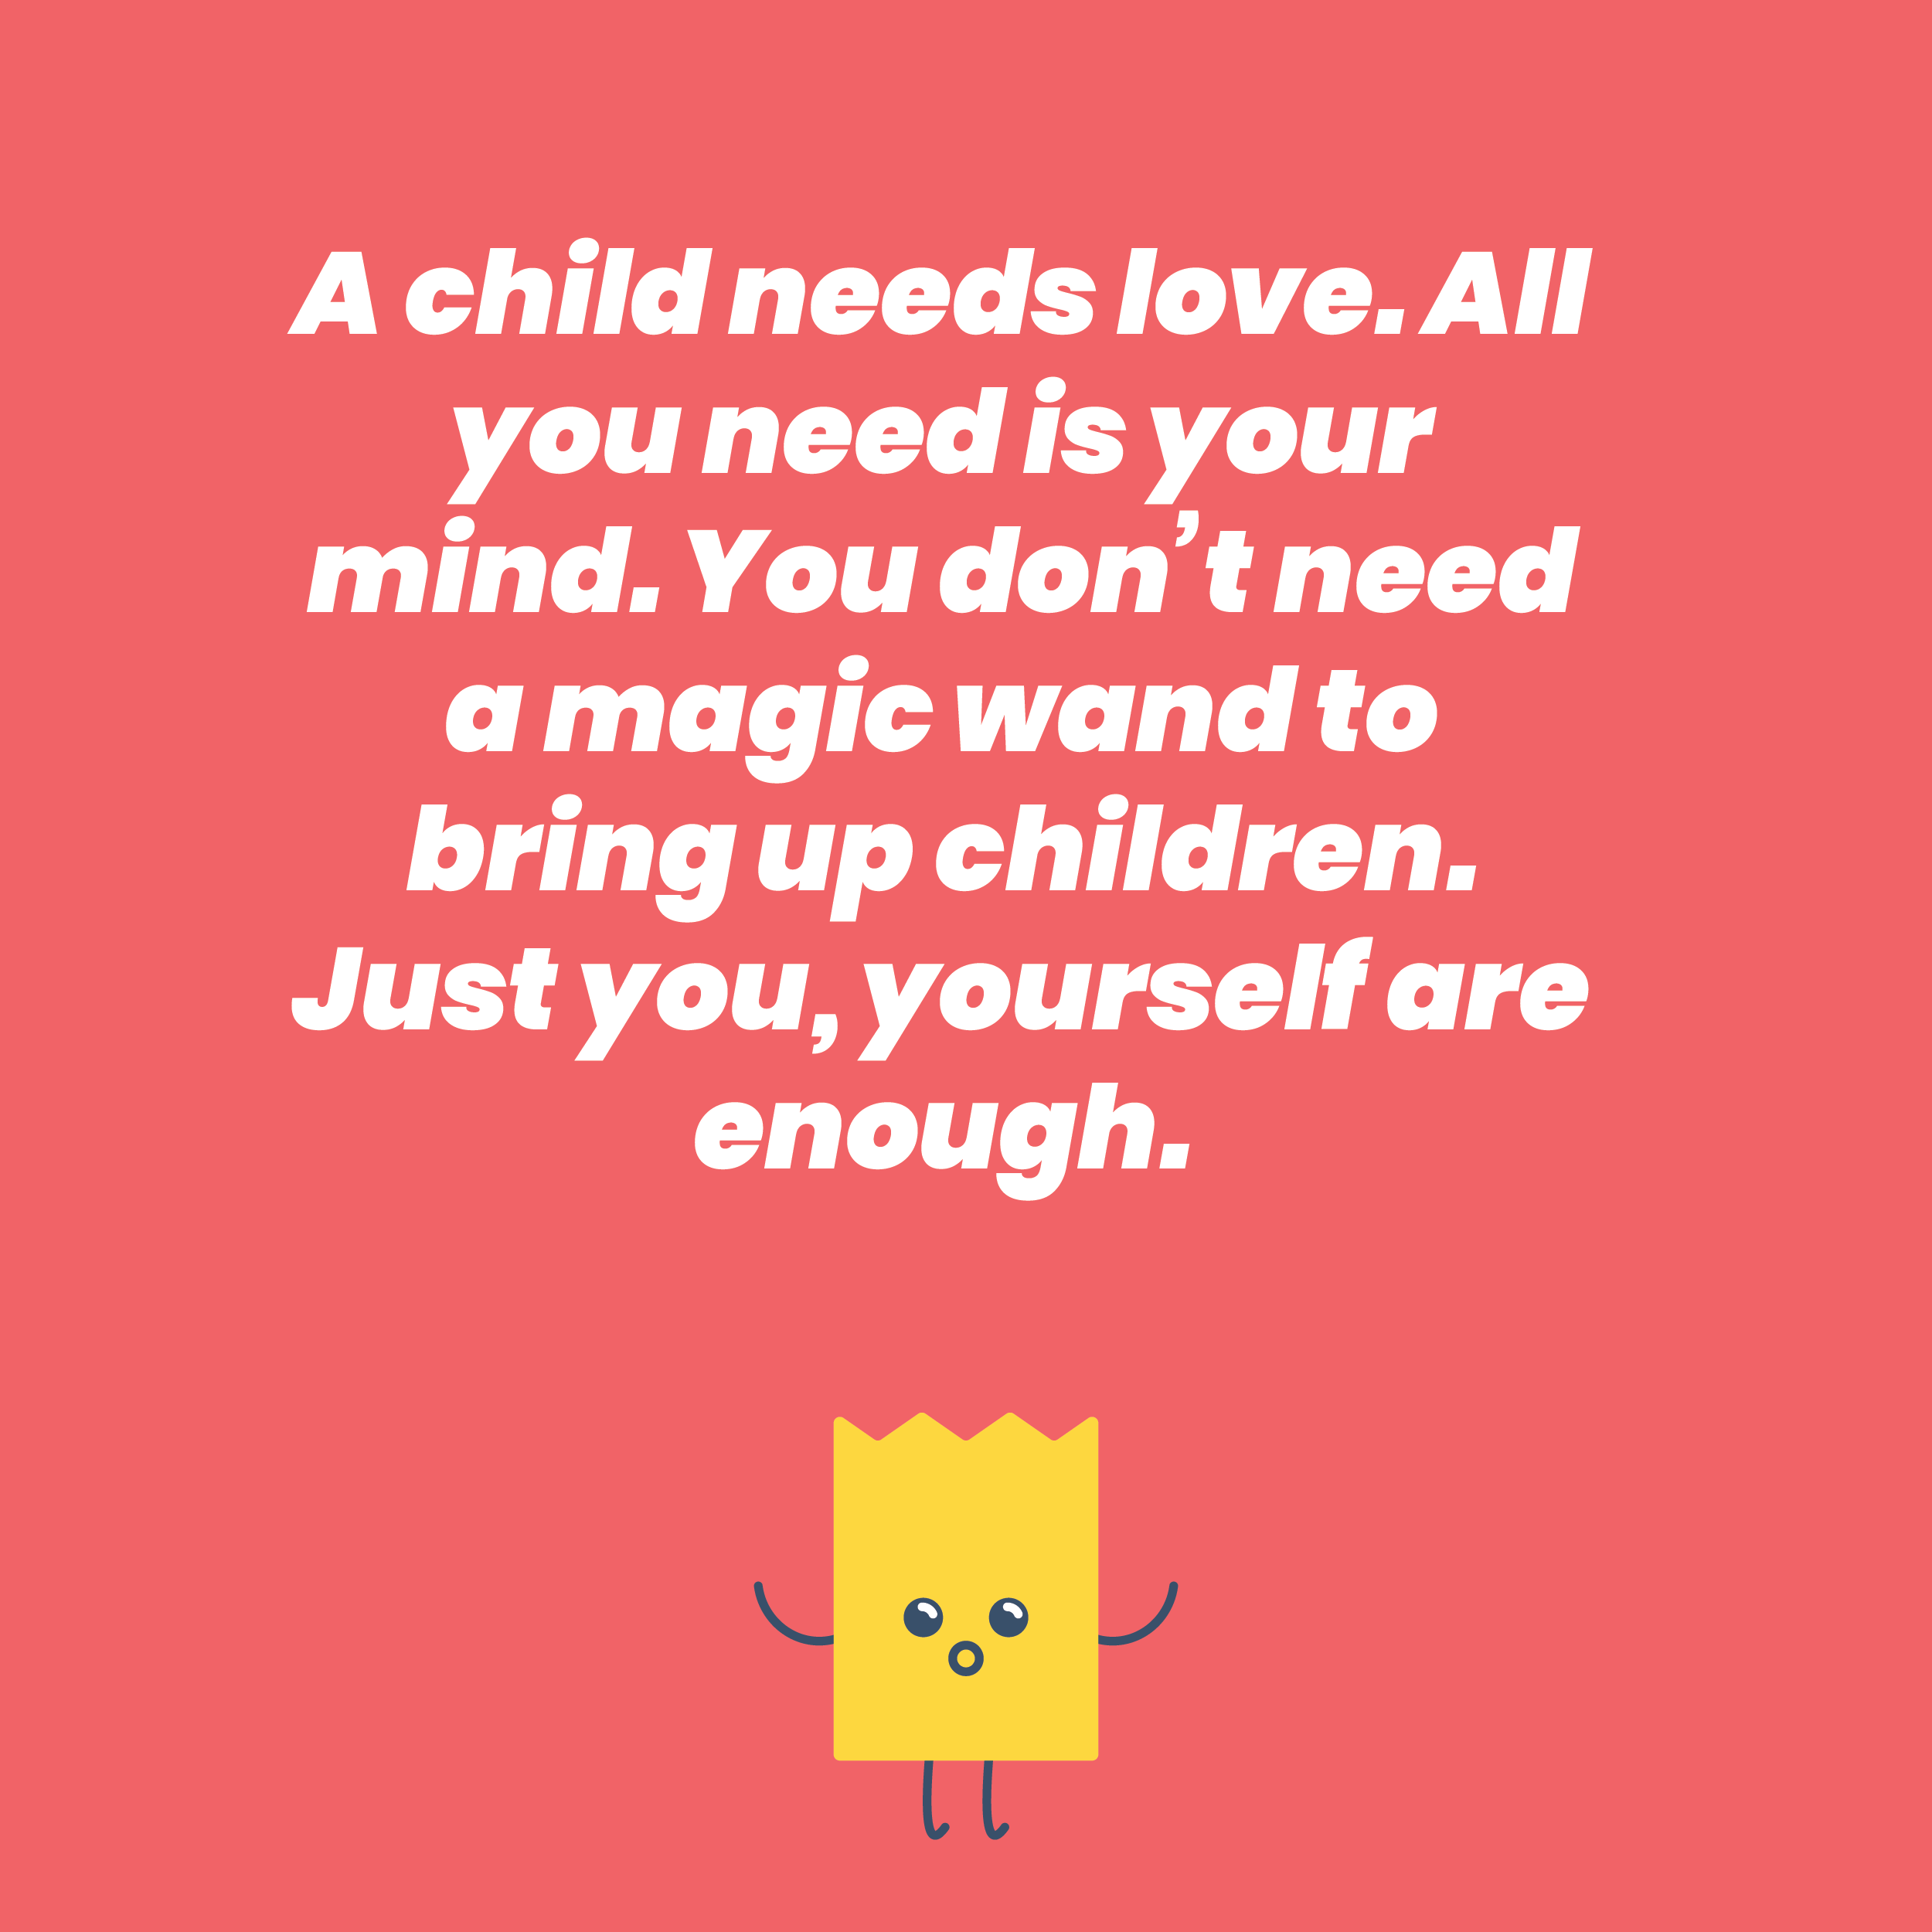 A child needs love. All you need is your mind. You don’t need a magic wand to bring up children. Just you, yourself are enough.